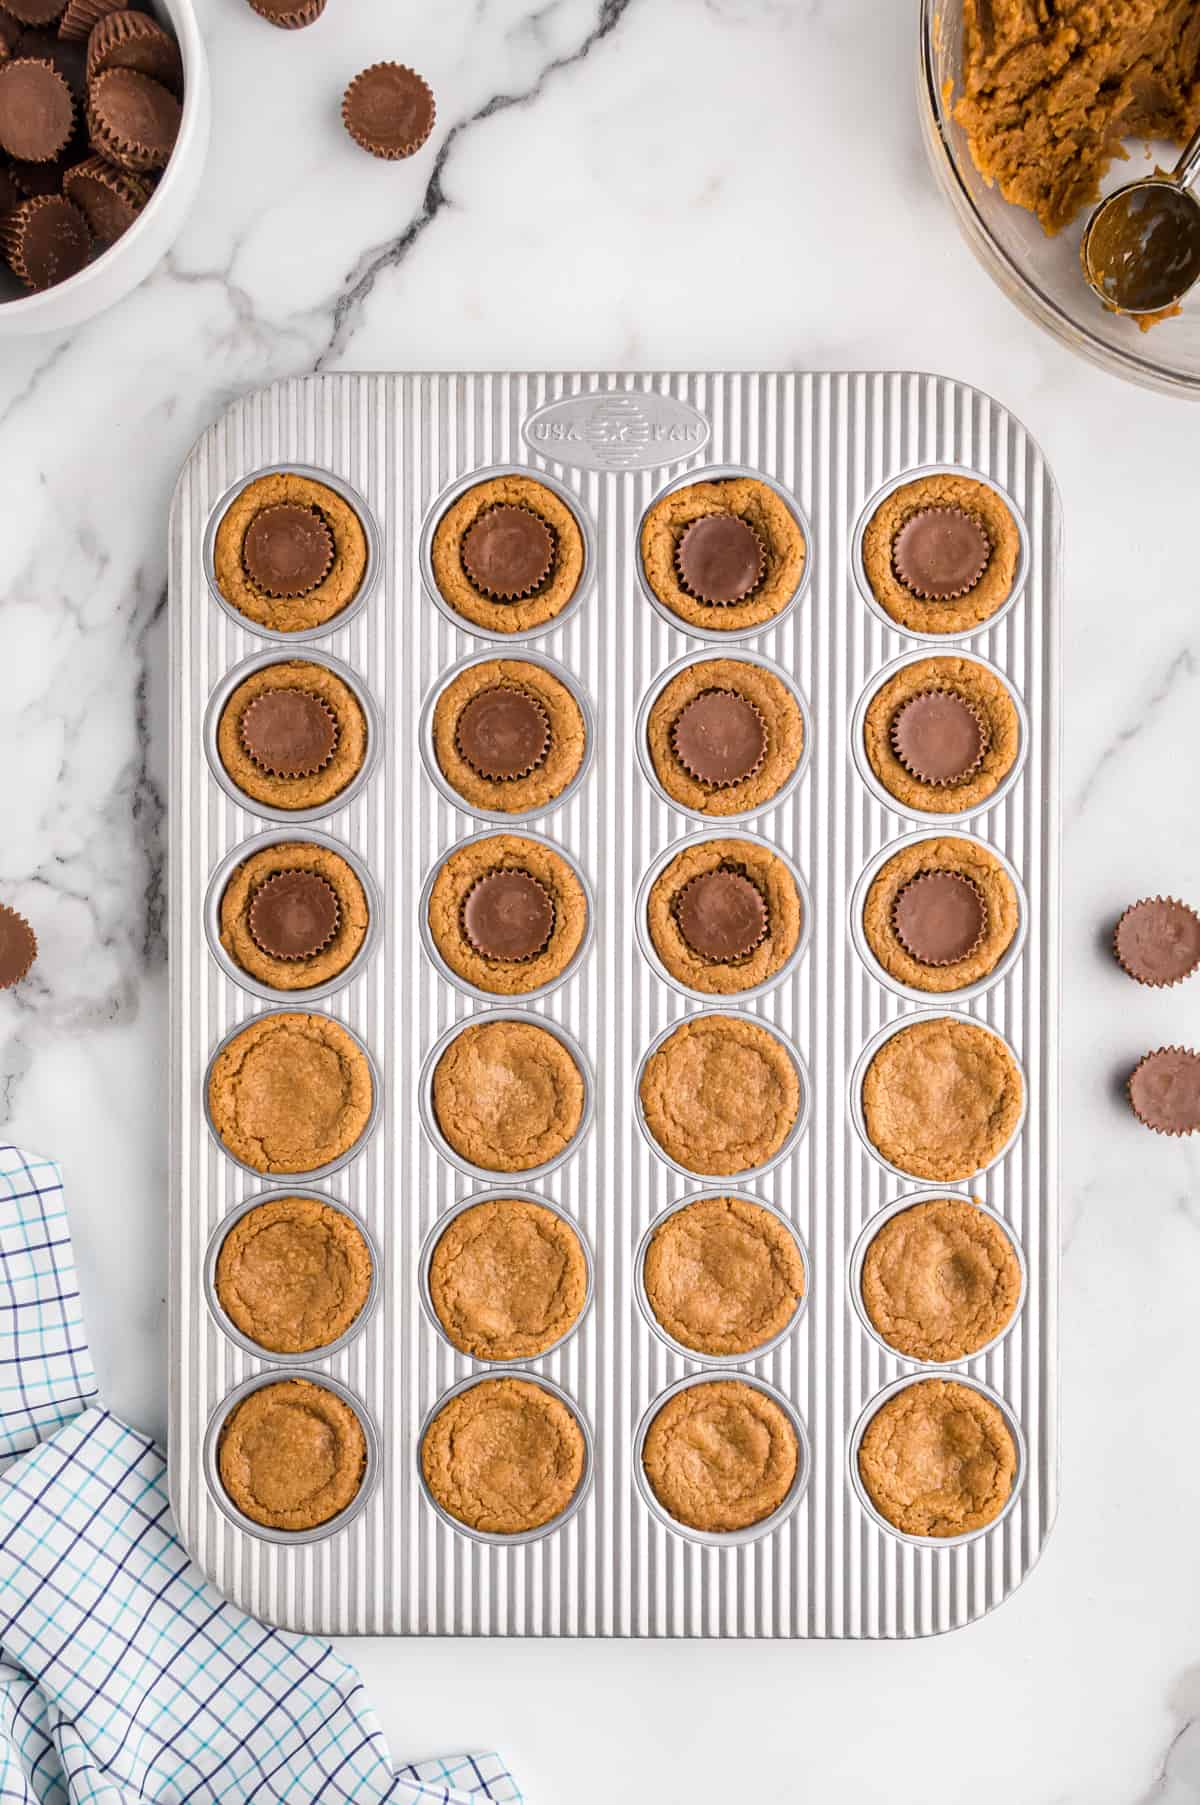 How to make peanut butter cookie cups with peanut butter cups